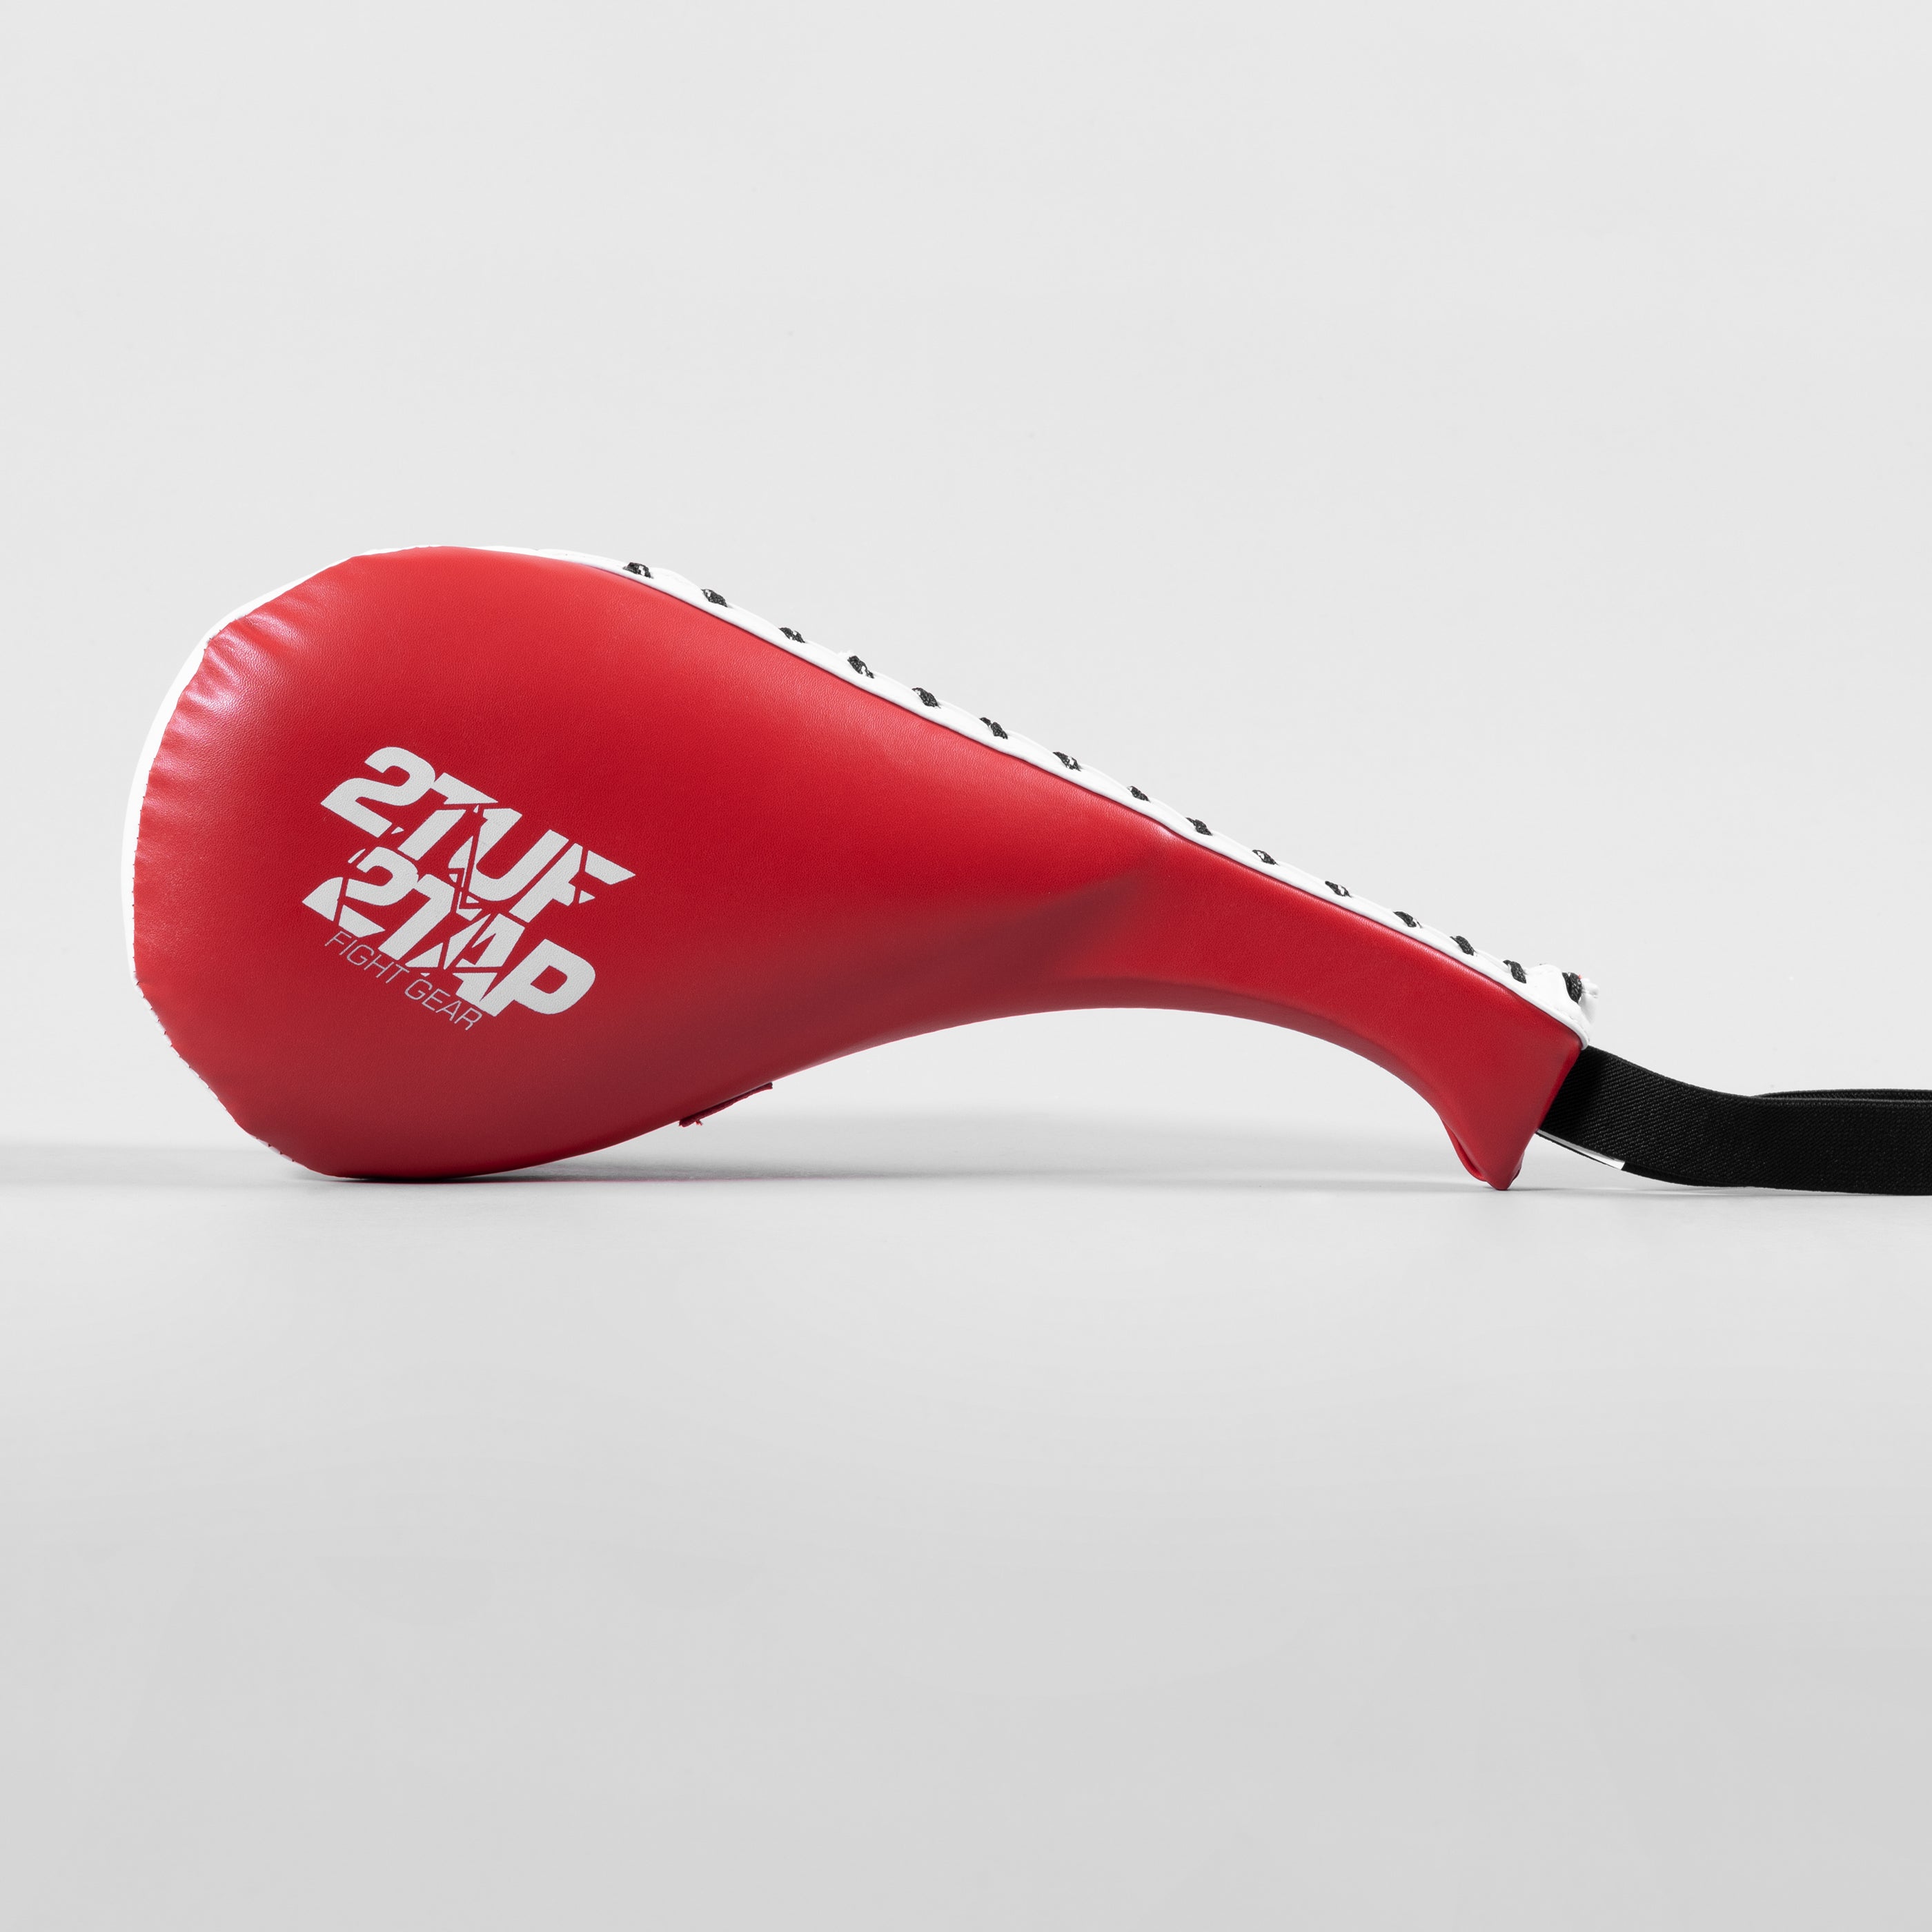 'Arrow' Double Target Paddle - Red/White 2TUF2TAP